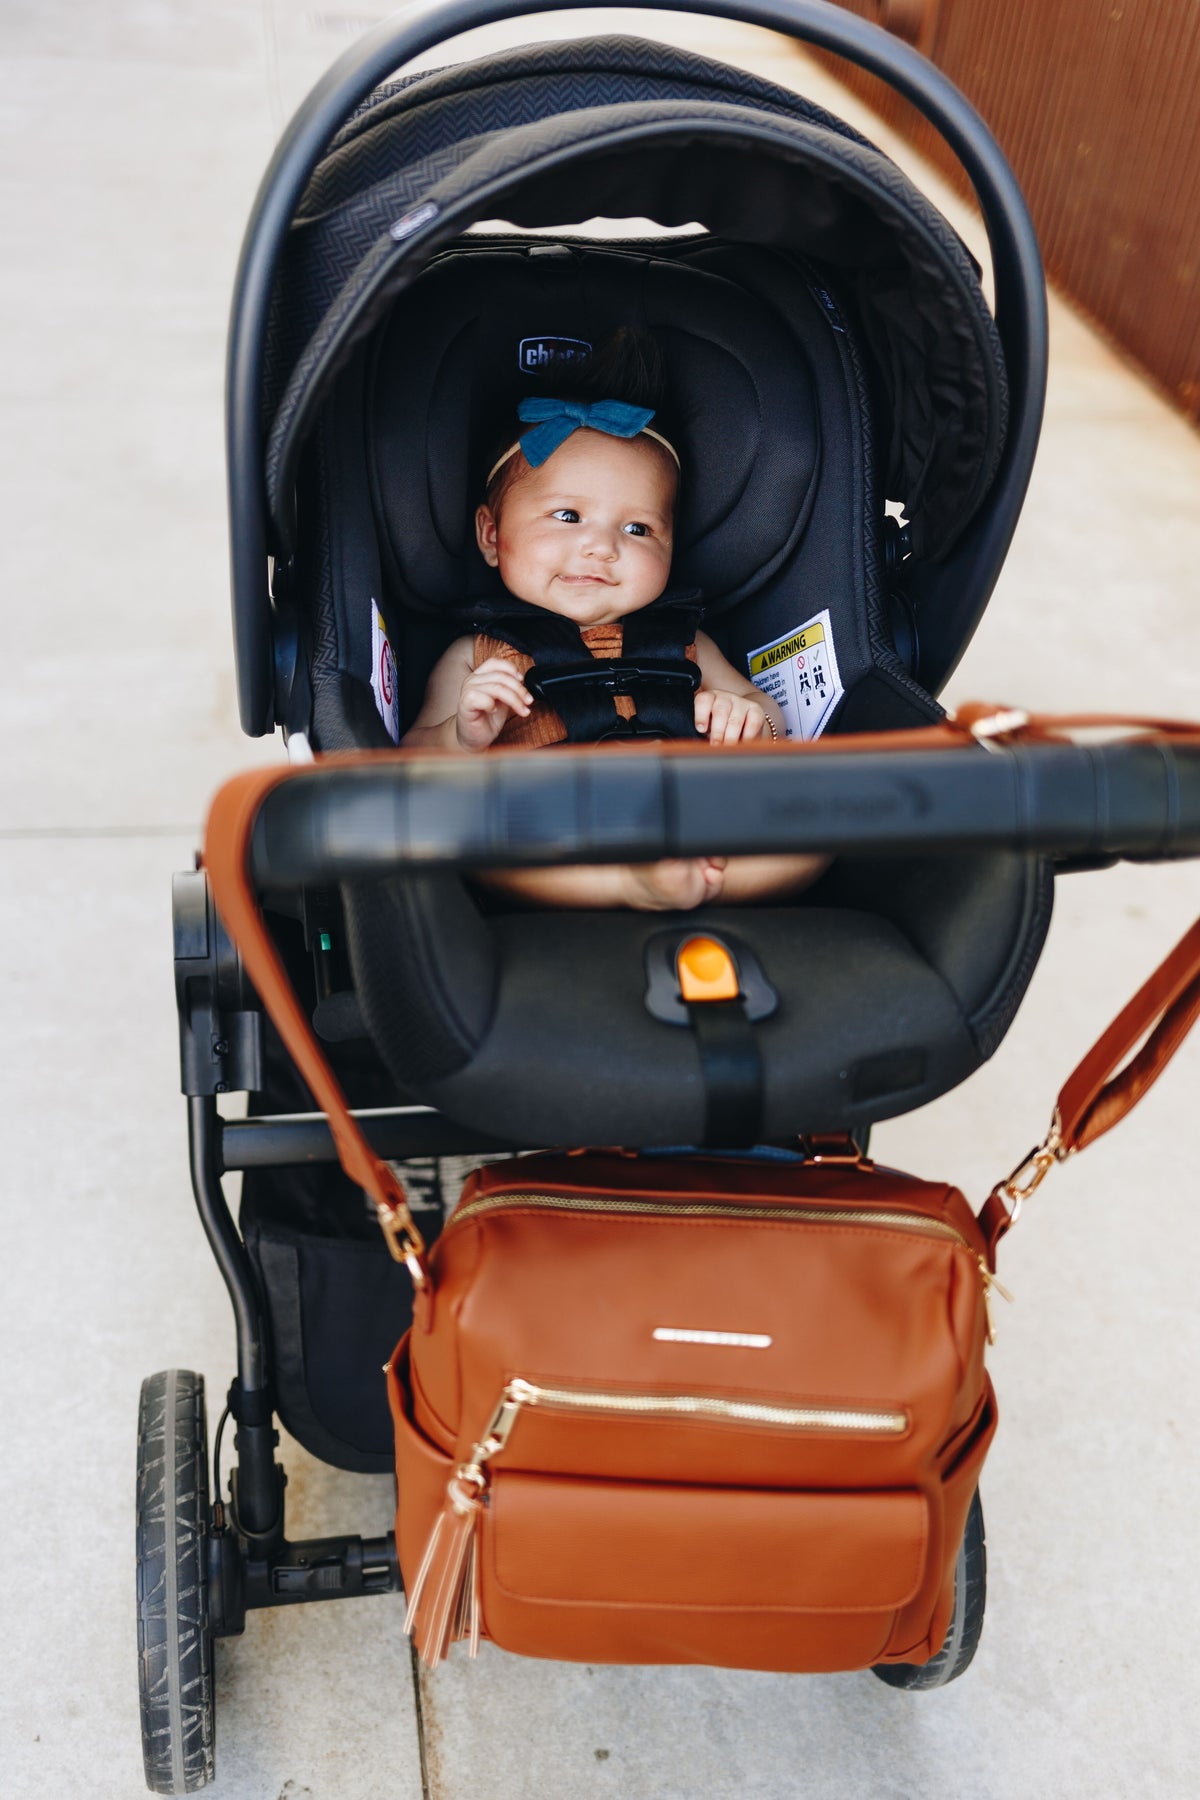 Lorenda Djanie What To Pack In Diaper Bag For Birth? You’ve been